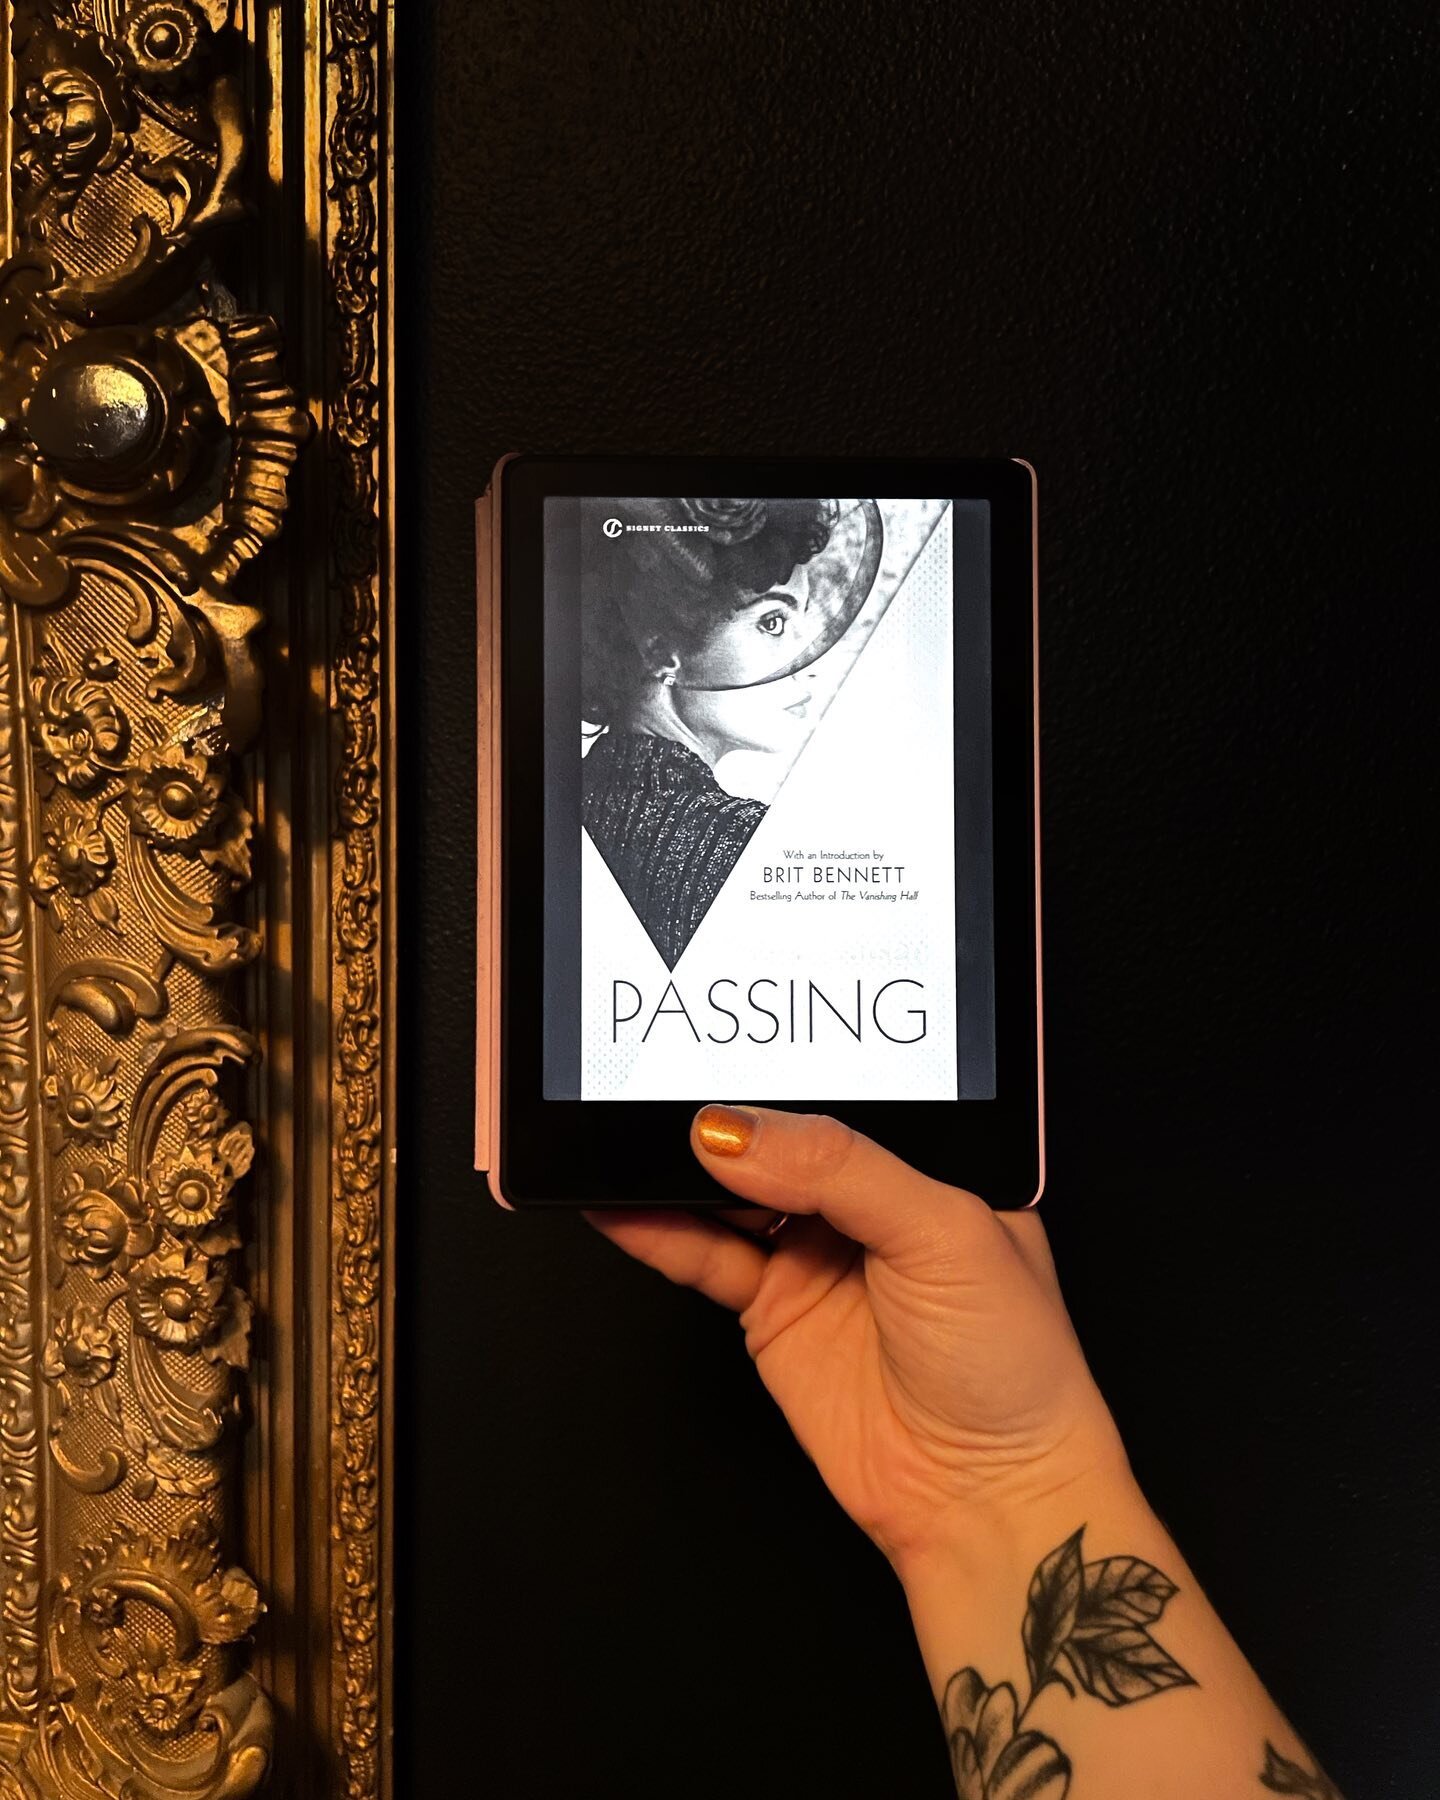 PASSING | Nella Larsen
@thestackspod book club pick 01/22

The short answer: 4/5⭐️

READ IF:
📗 You&rsquo;re up for a short, but drama-filled read. This book moves quickly and the author uses suspense in a really interesting way.
📗 You liked books l